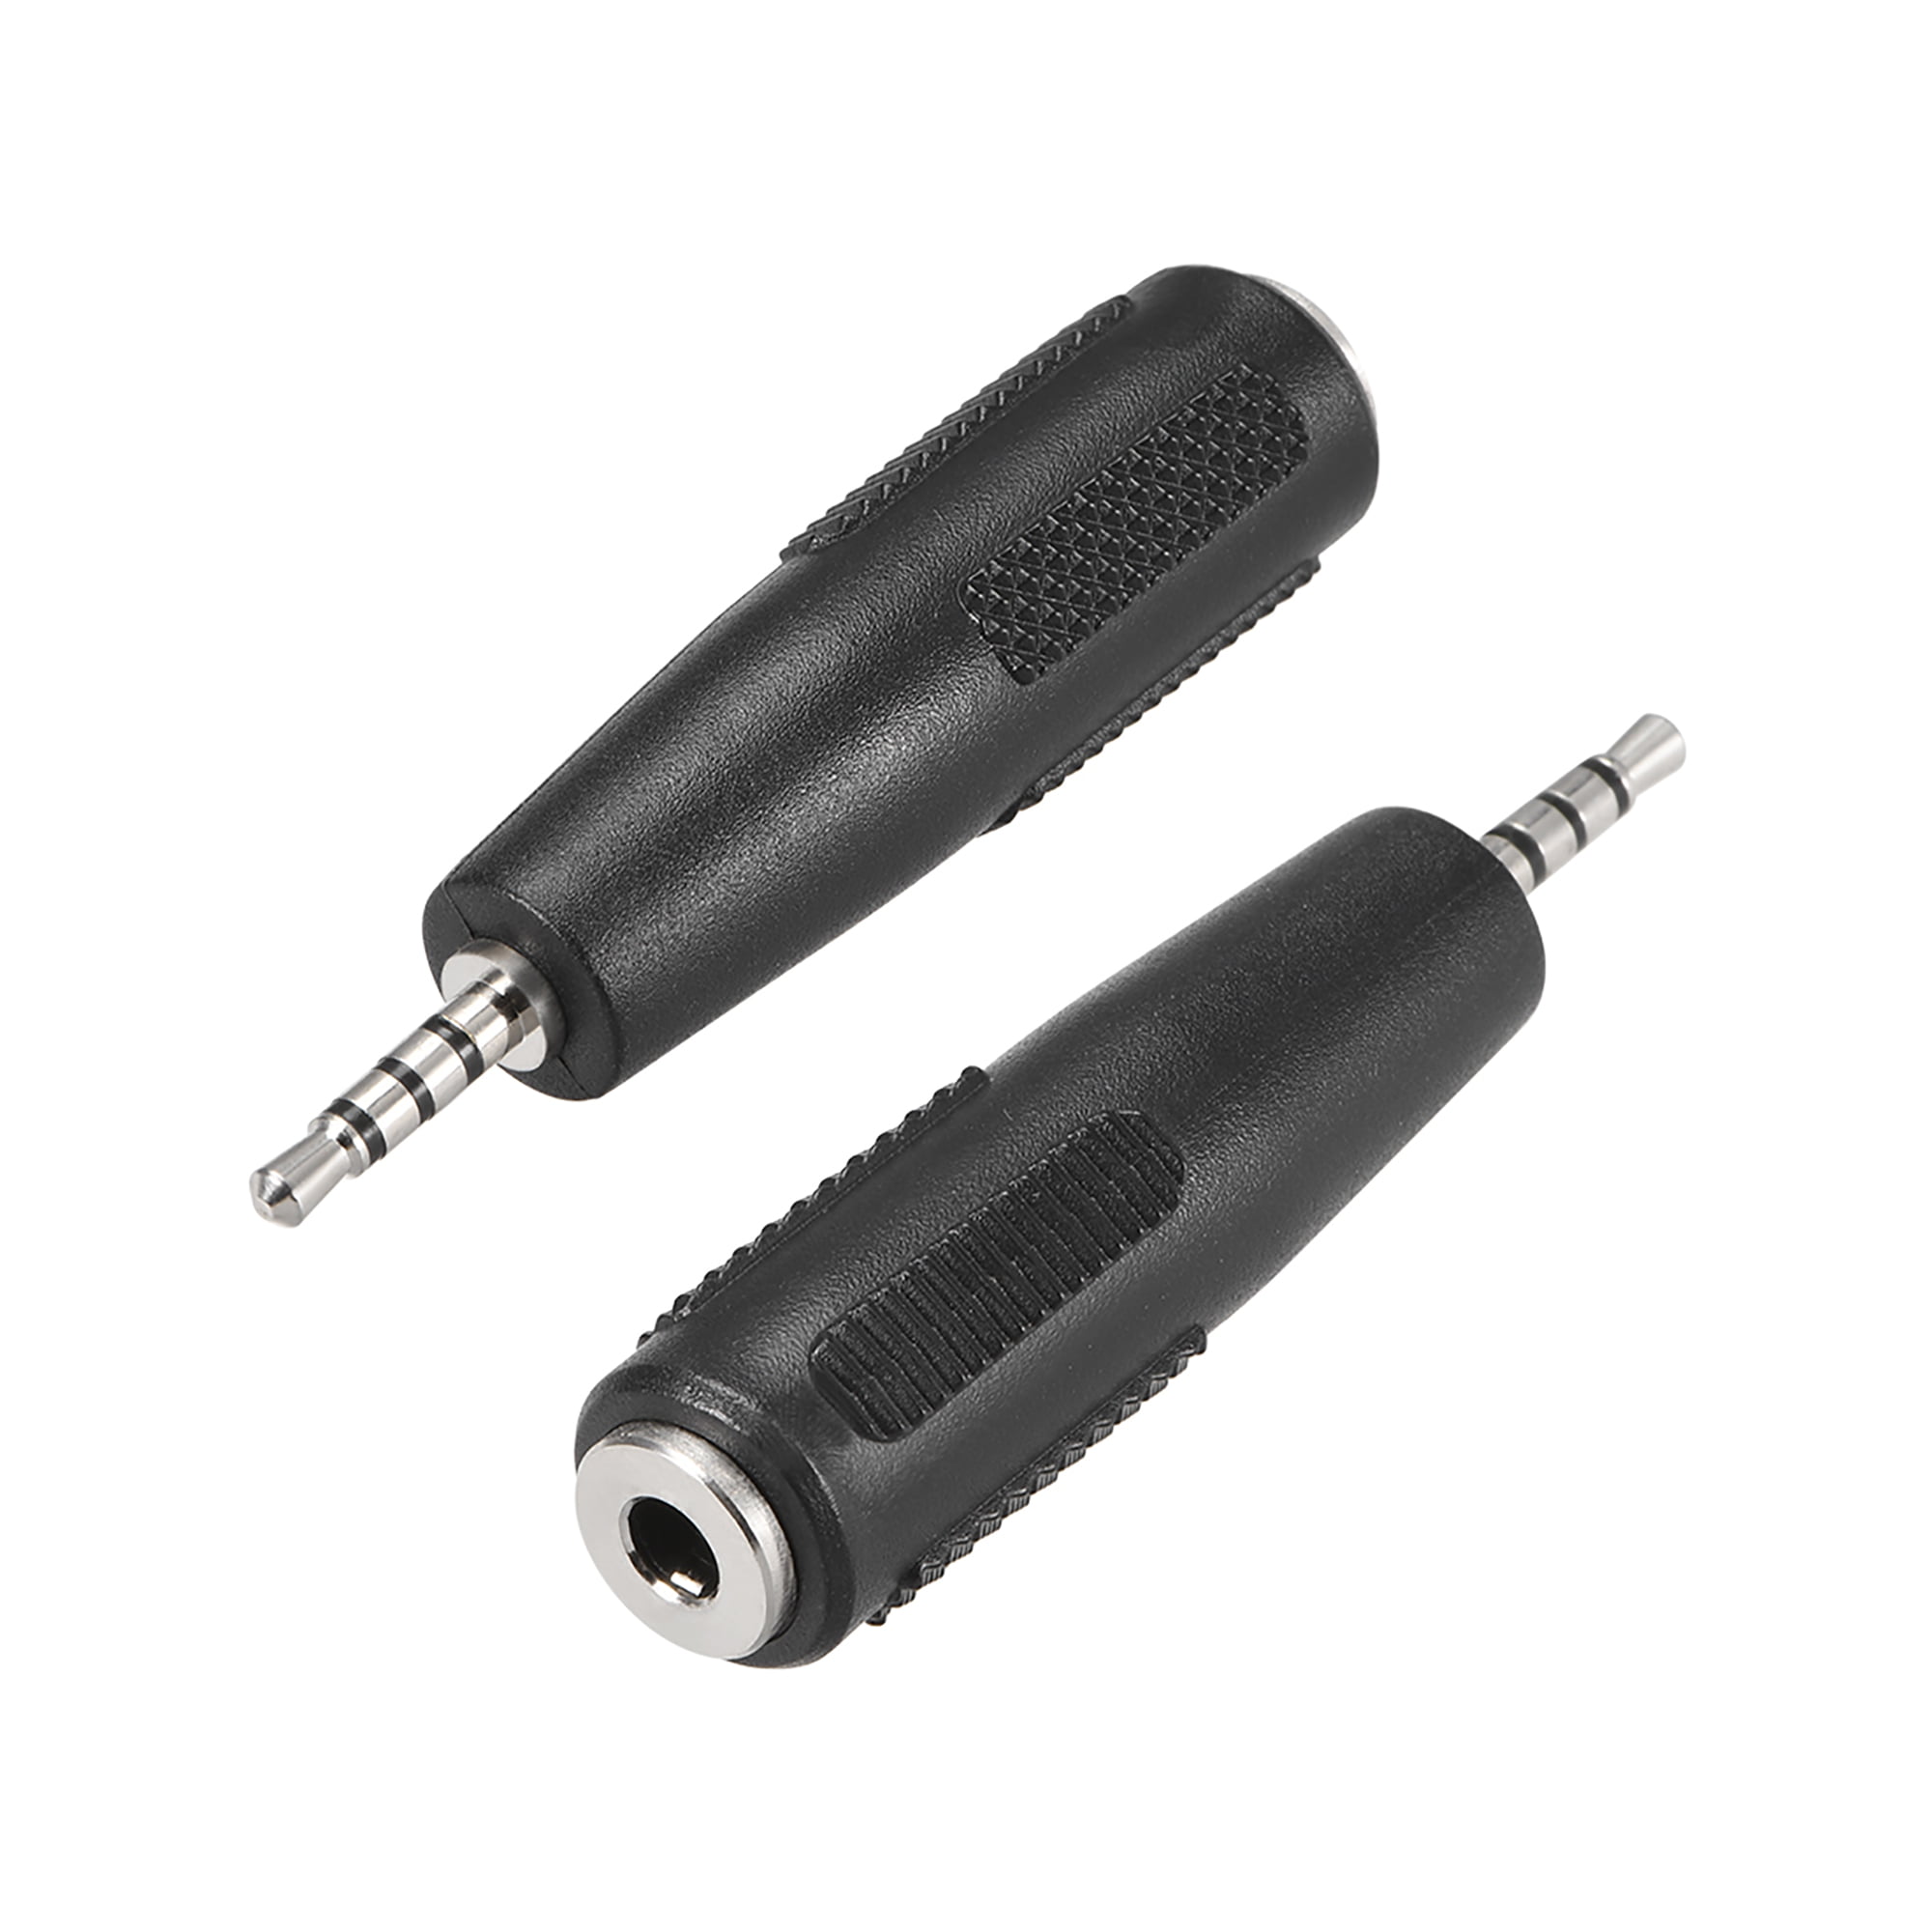 3.5 mm 4 pole female to 3 pole male adapter